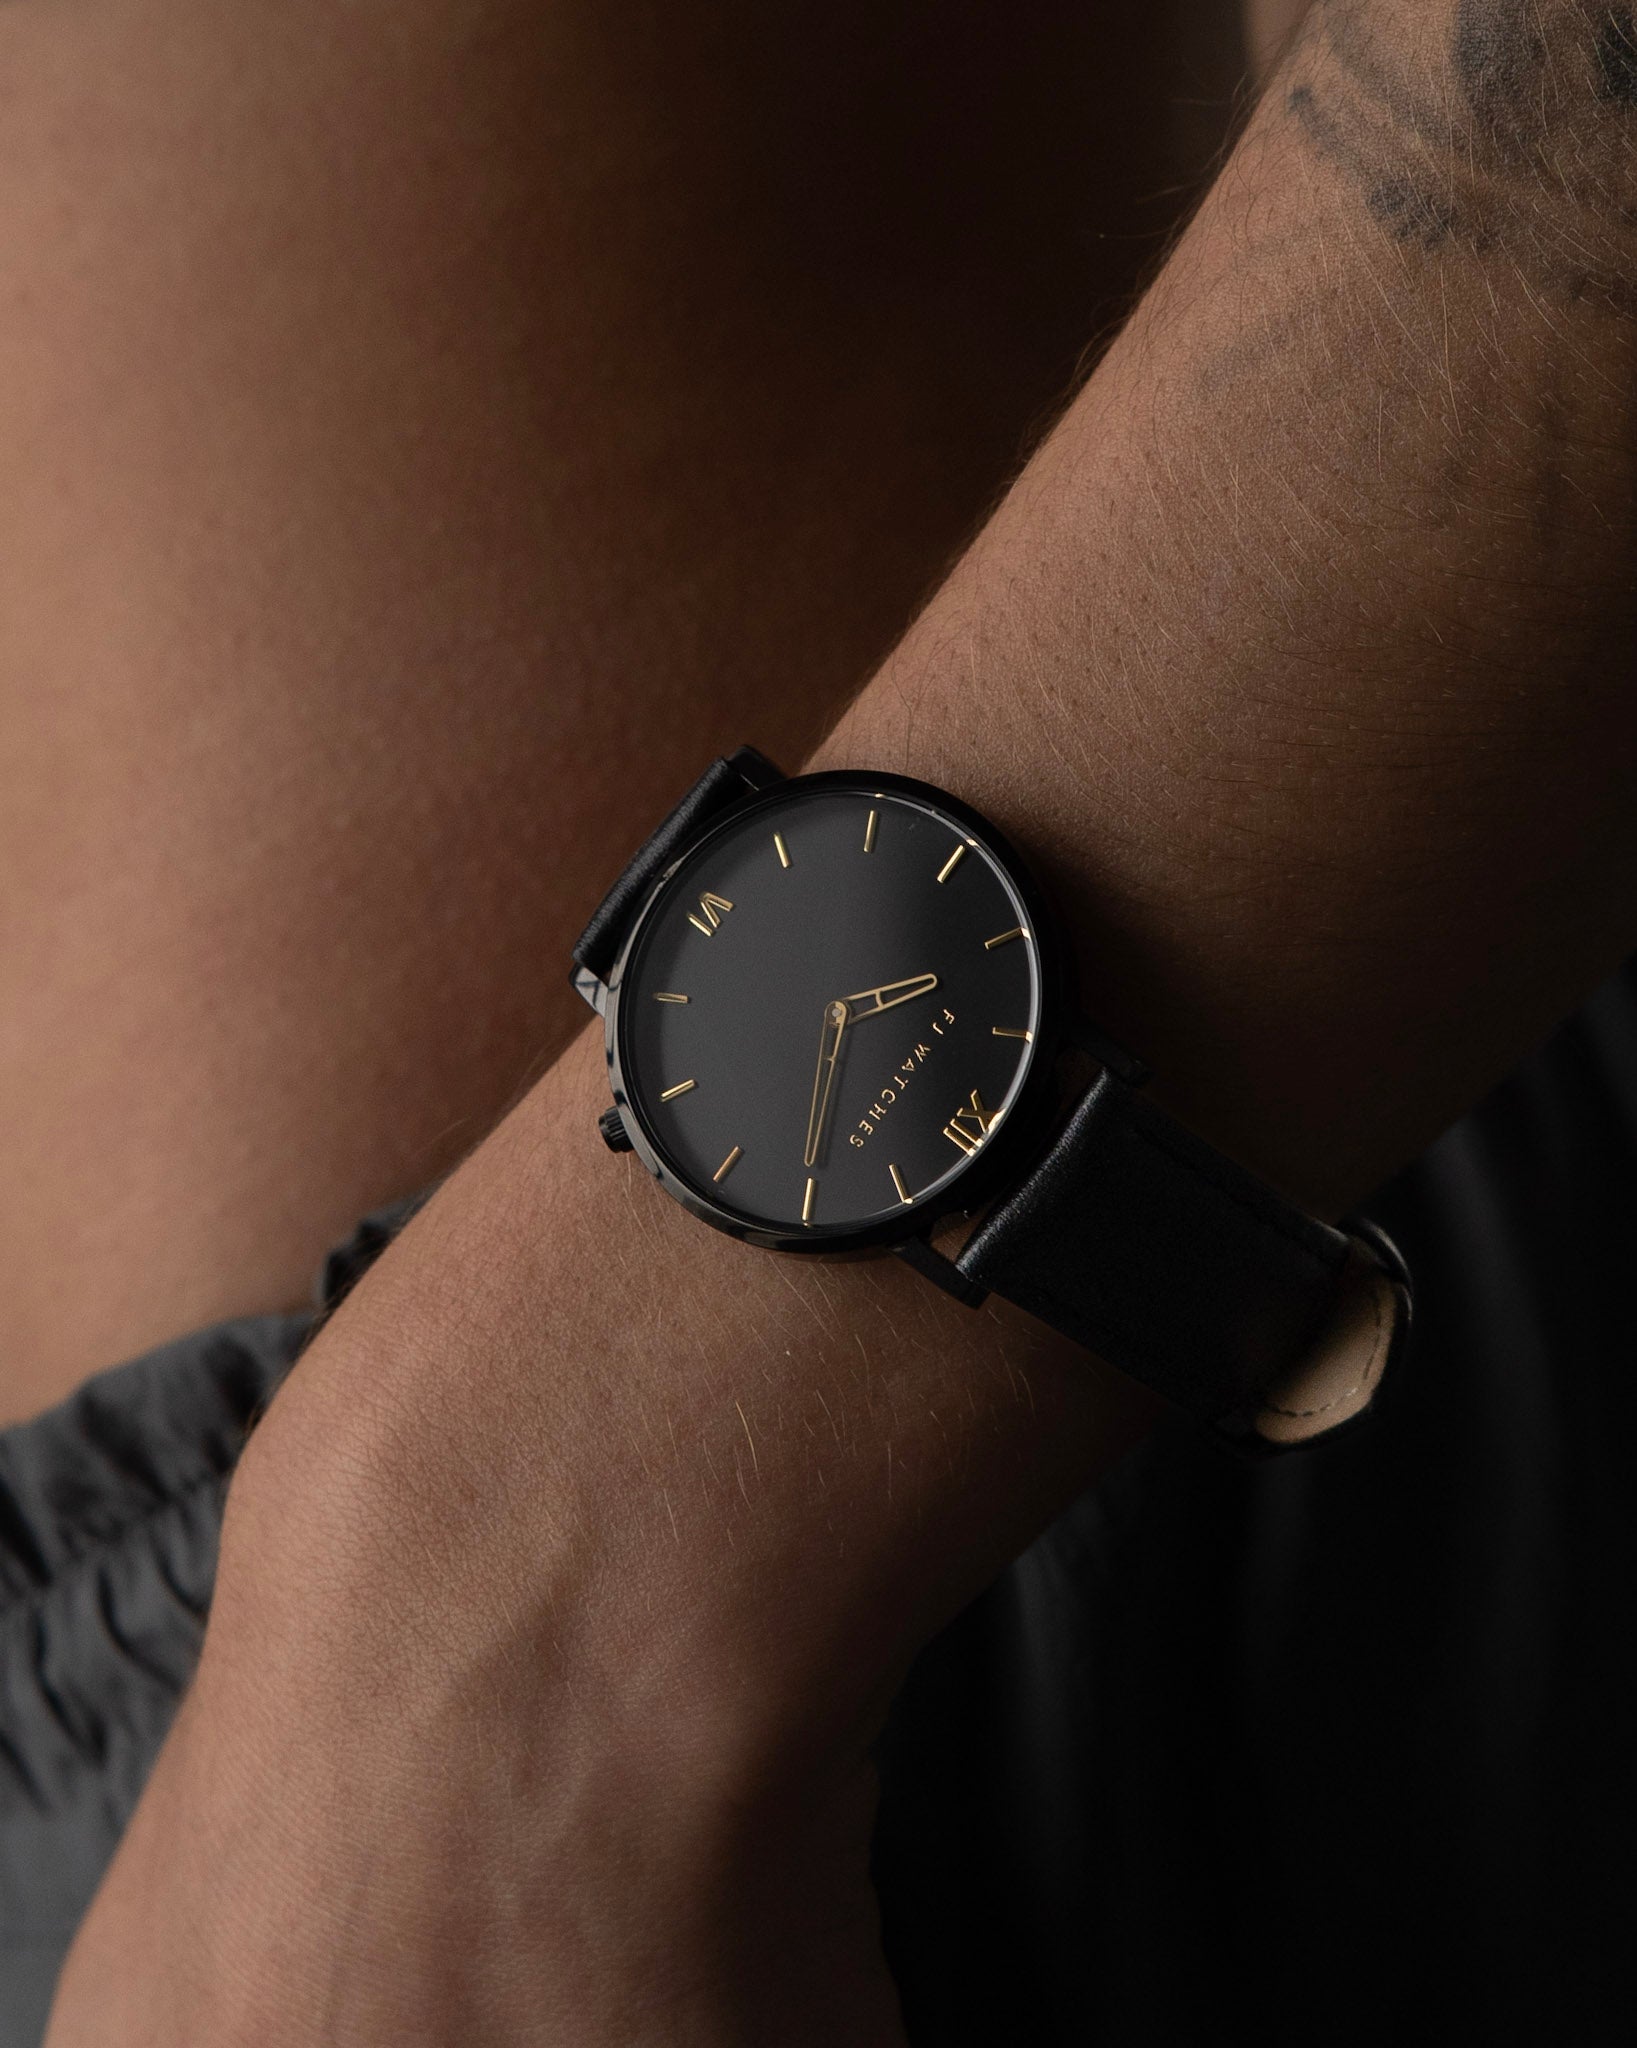 Discover Oro moon, a 36mm women's watch signed Five Jwlry with an all-black dial and gold hands. This one comes with a genuine black leather strap!